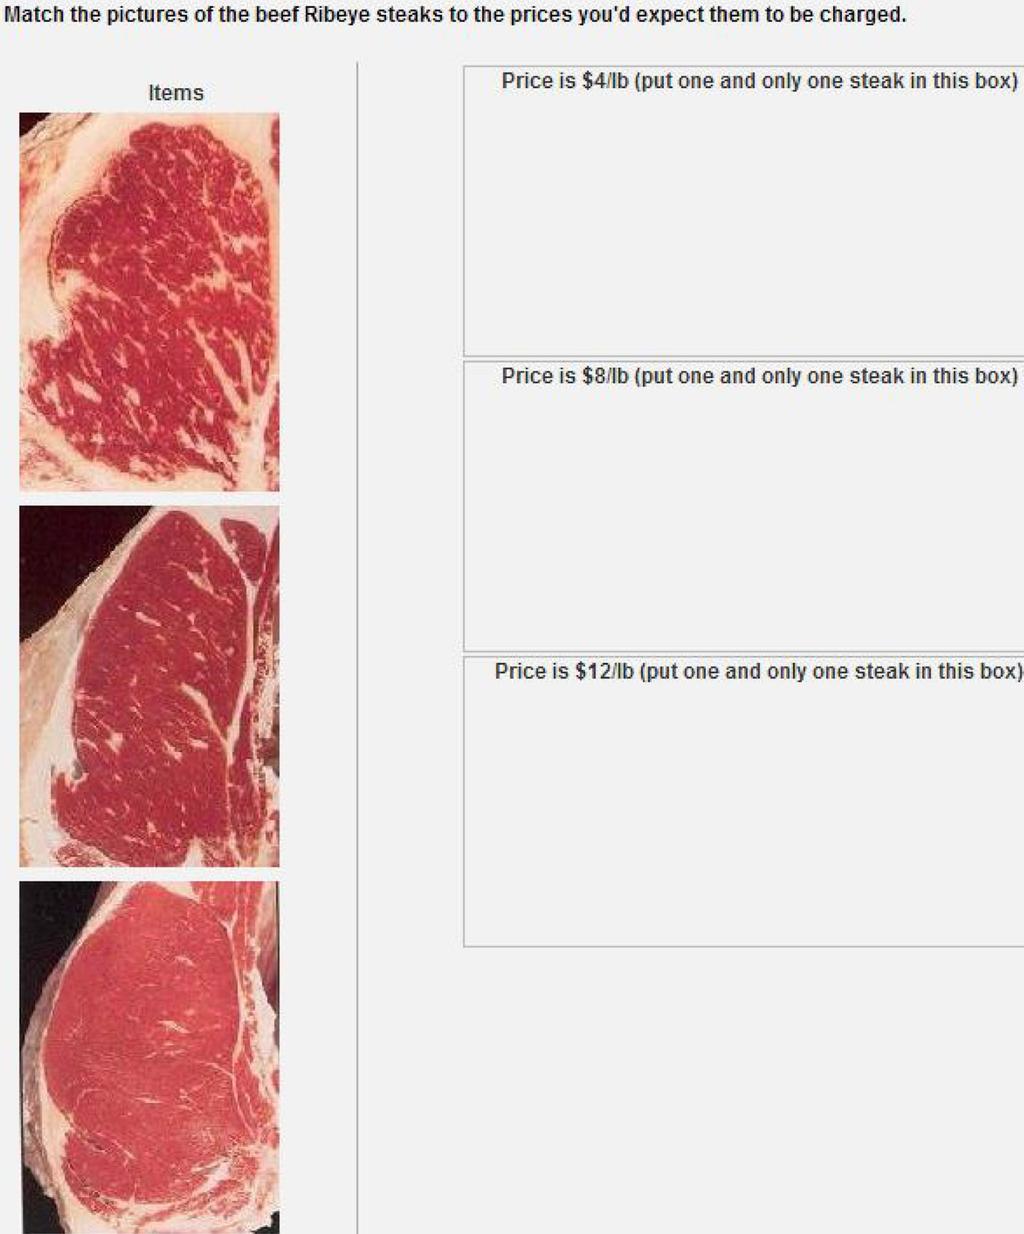 3144 DeVuyst et al. Figure 1. Picture price matching question. Prime as the leanest, middle, and highest fat content beef. A 95% 